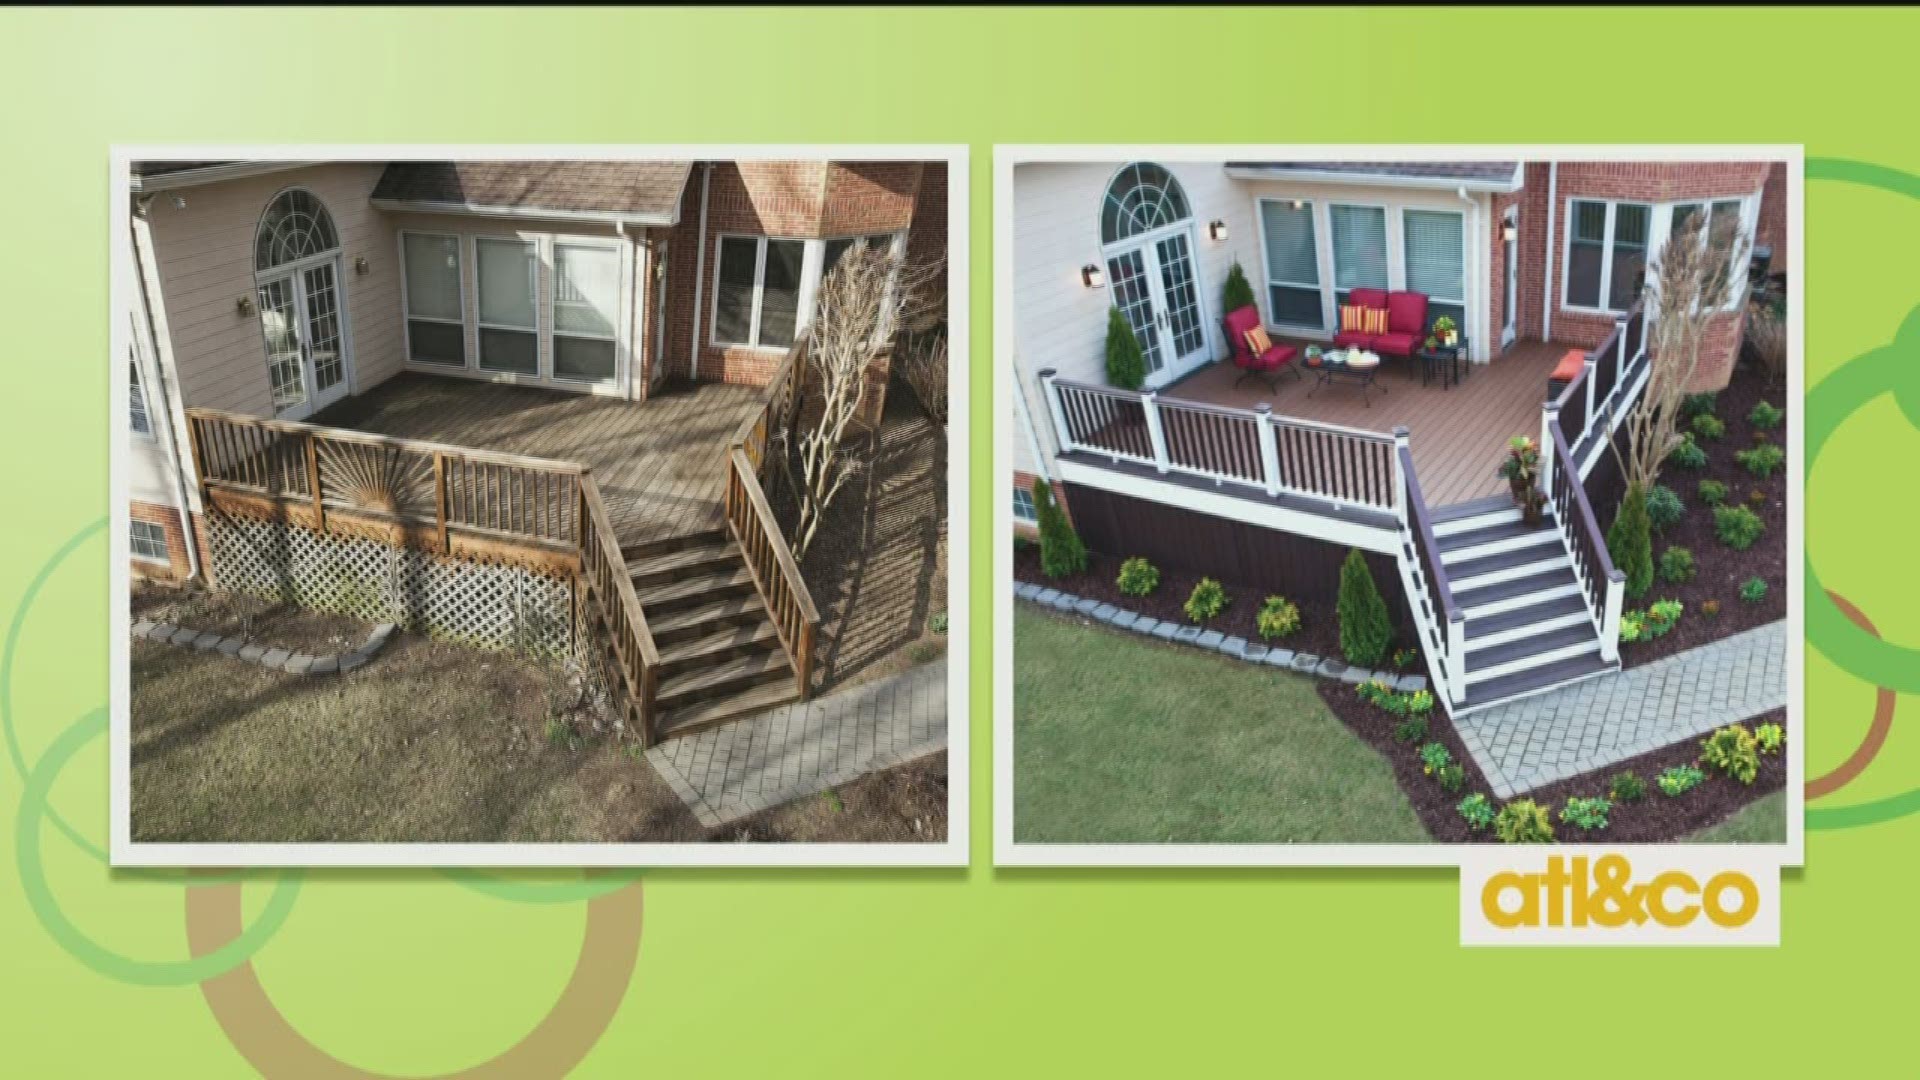 Engineering what's next in outdoor living! Learn about TREX Composite Decking on 'Atlanta & Company'